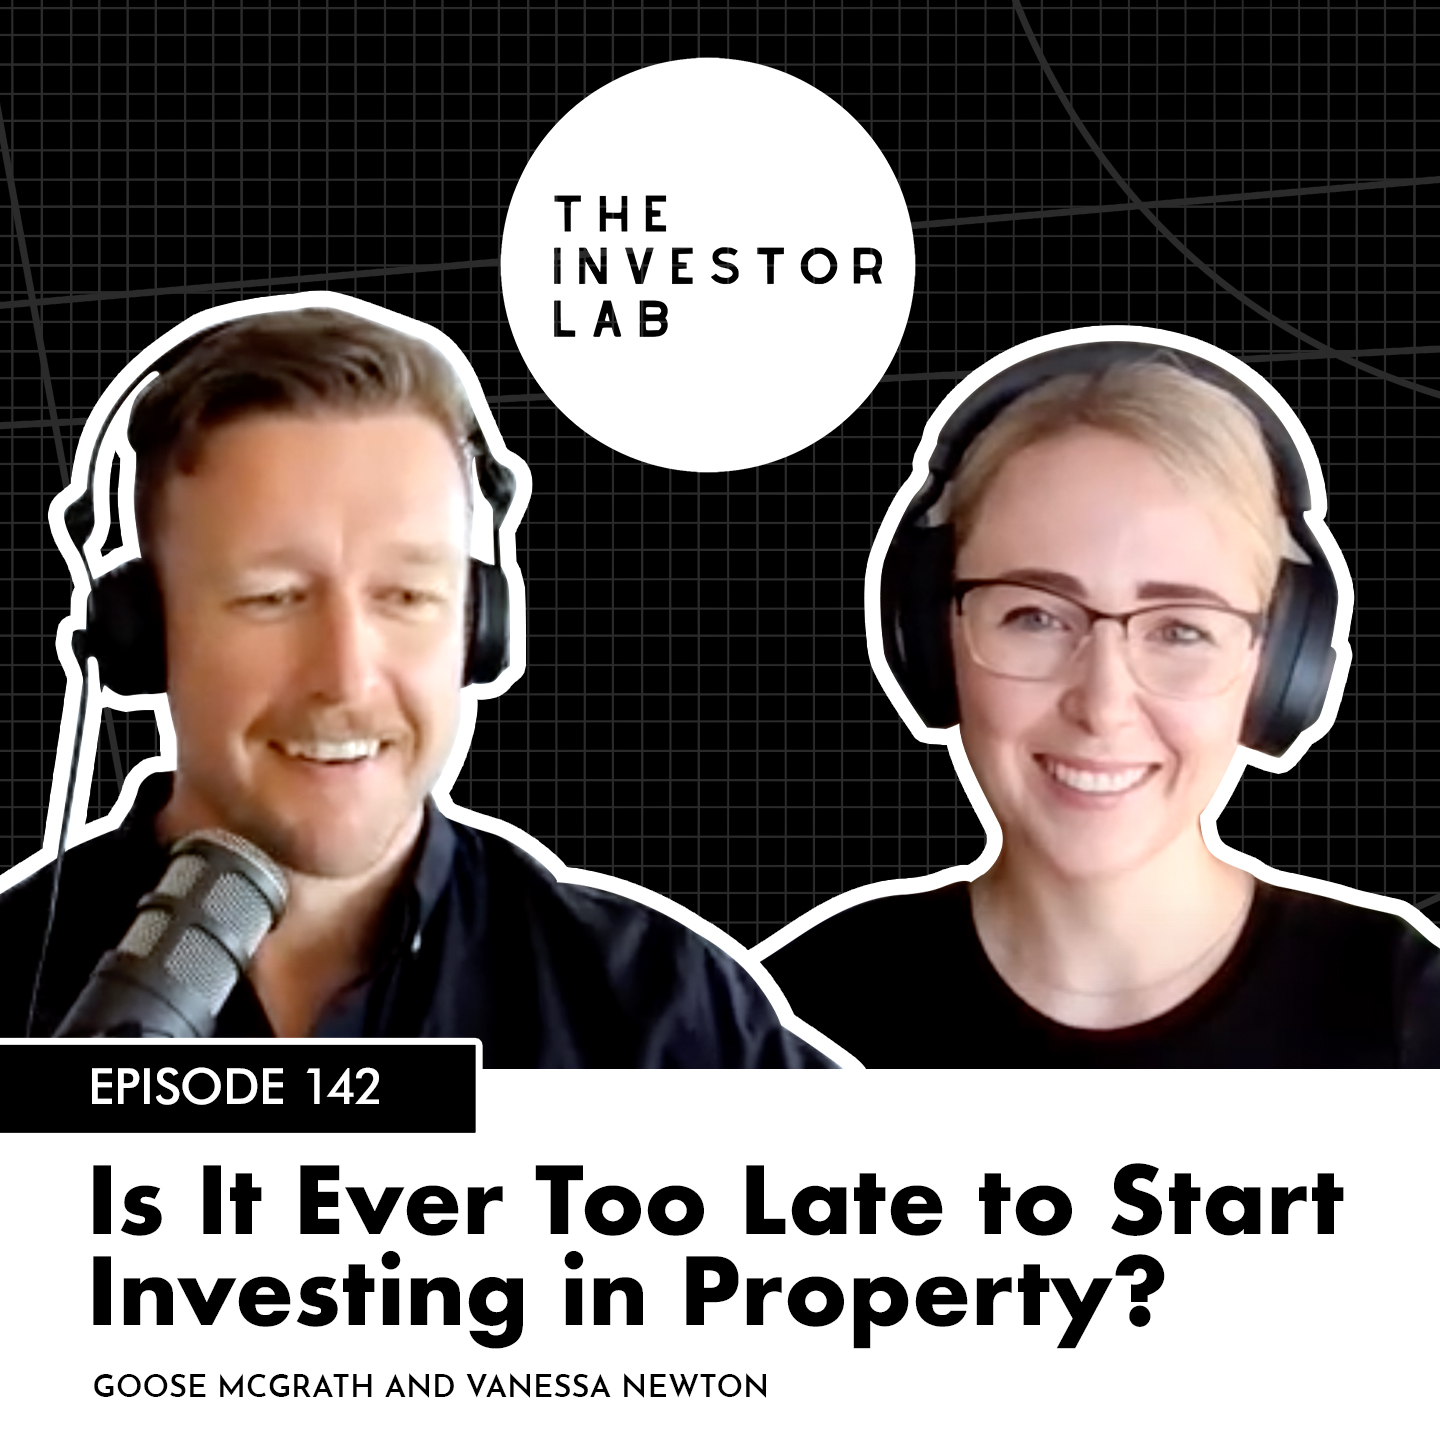 Is It Ever Too Late to Start Investing in Property?